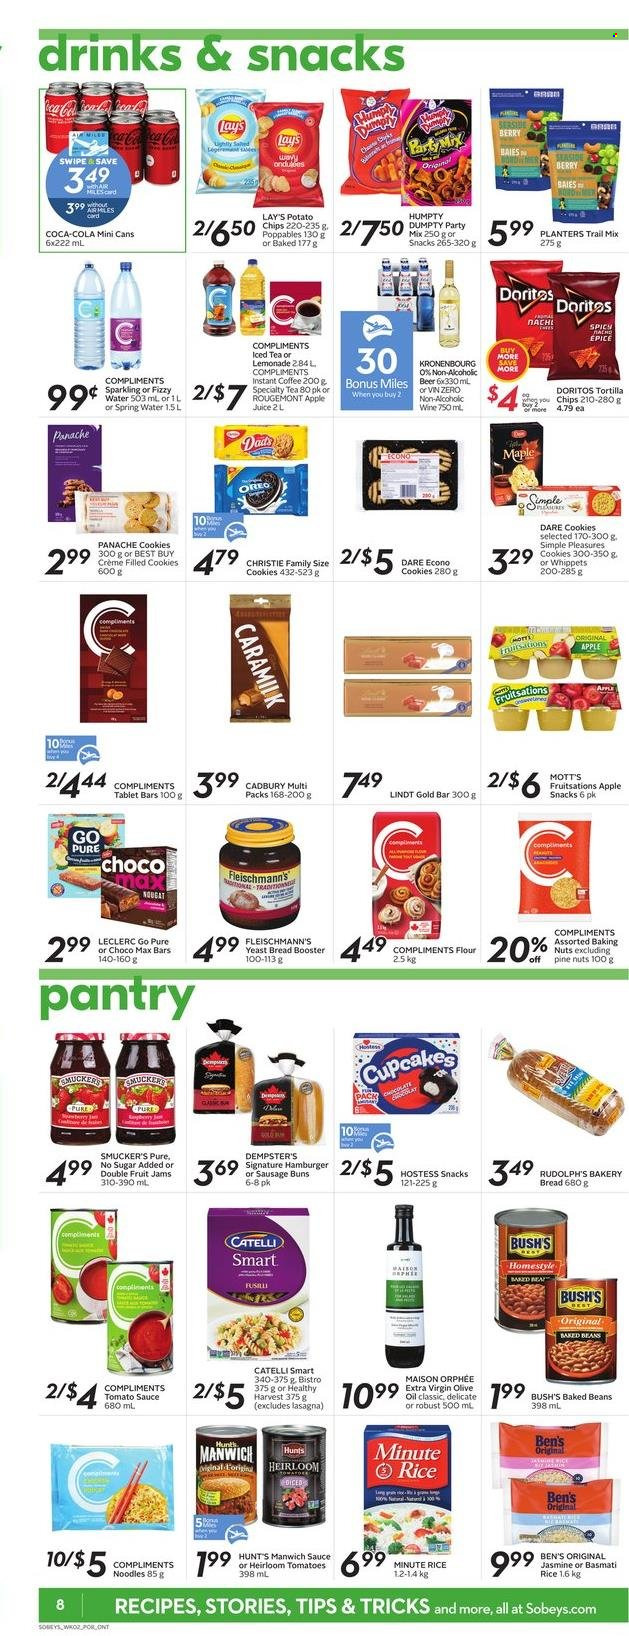 thumbnail - Sobeys Flyer - May 12, 2022 - May 18, 2022 - Sales products - bread, tortillas, buns, cupcake, Mott's, hamburger, sauce, noodles, sausage, yeast, cookies, Cadbury, Doritos, potato chips, chips, Lay’s, tomato sauce, baked beans, Manwich, basmati rice, rice, extra virgin olive oil, olive oil, oil, pine nuts, Planters, trail mix, apple juice, Coca-Cola, lemonade, juice, ice tea, spring water, instant coffee, beer, Oreo, Lindt. Page 8.